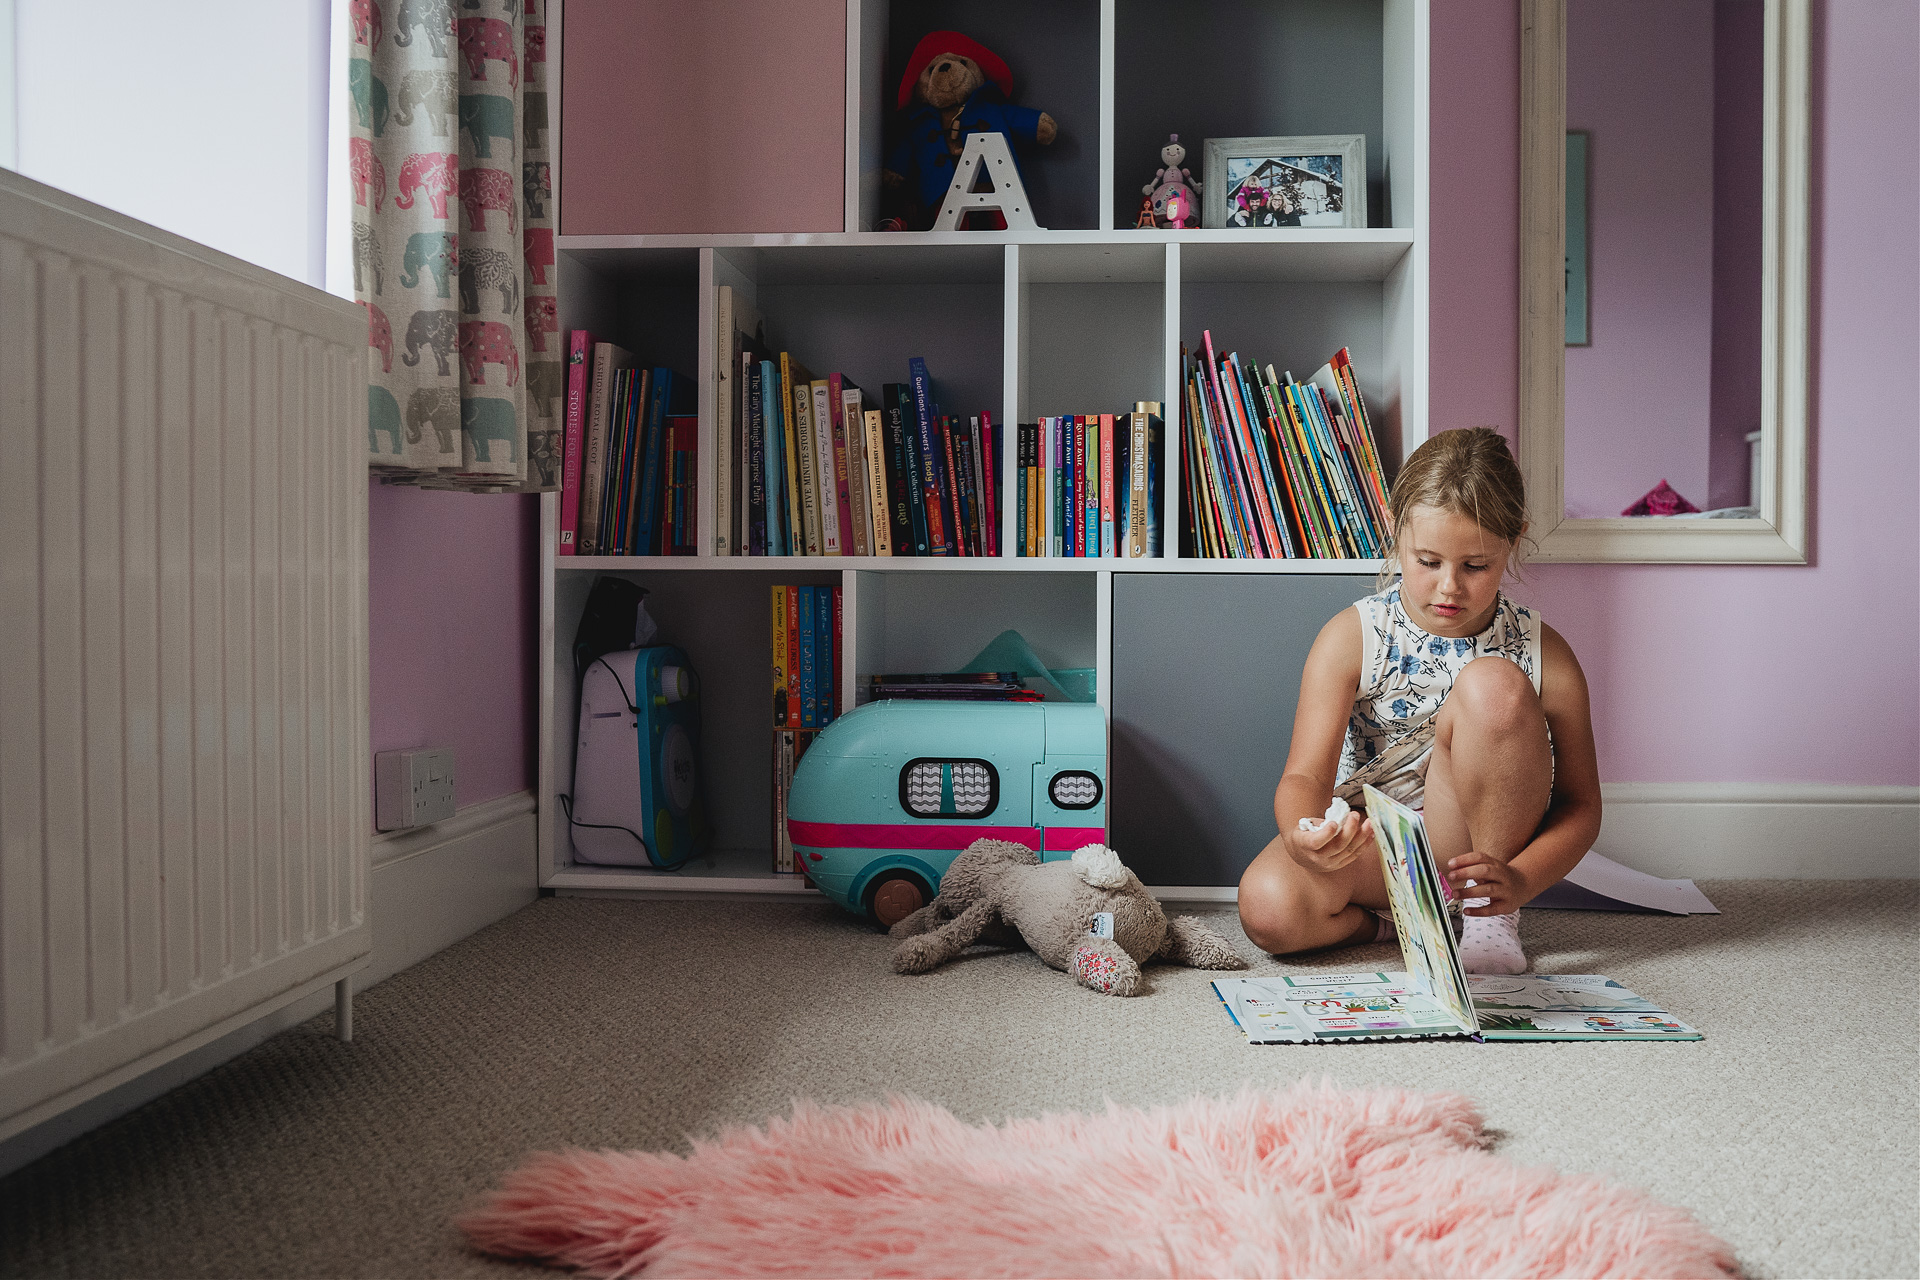 A young girl reading books in her bedroom